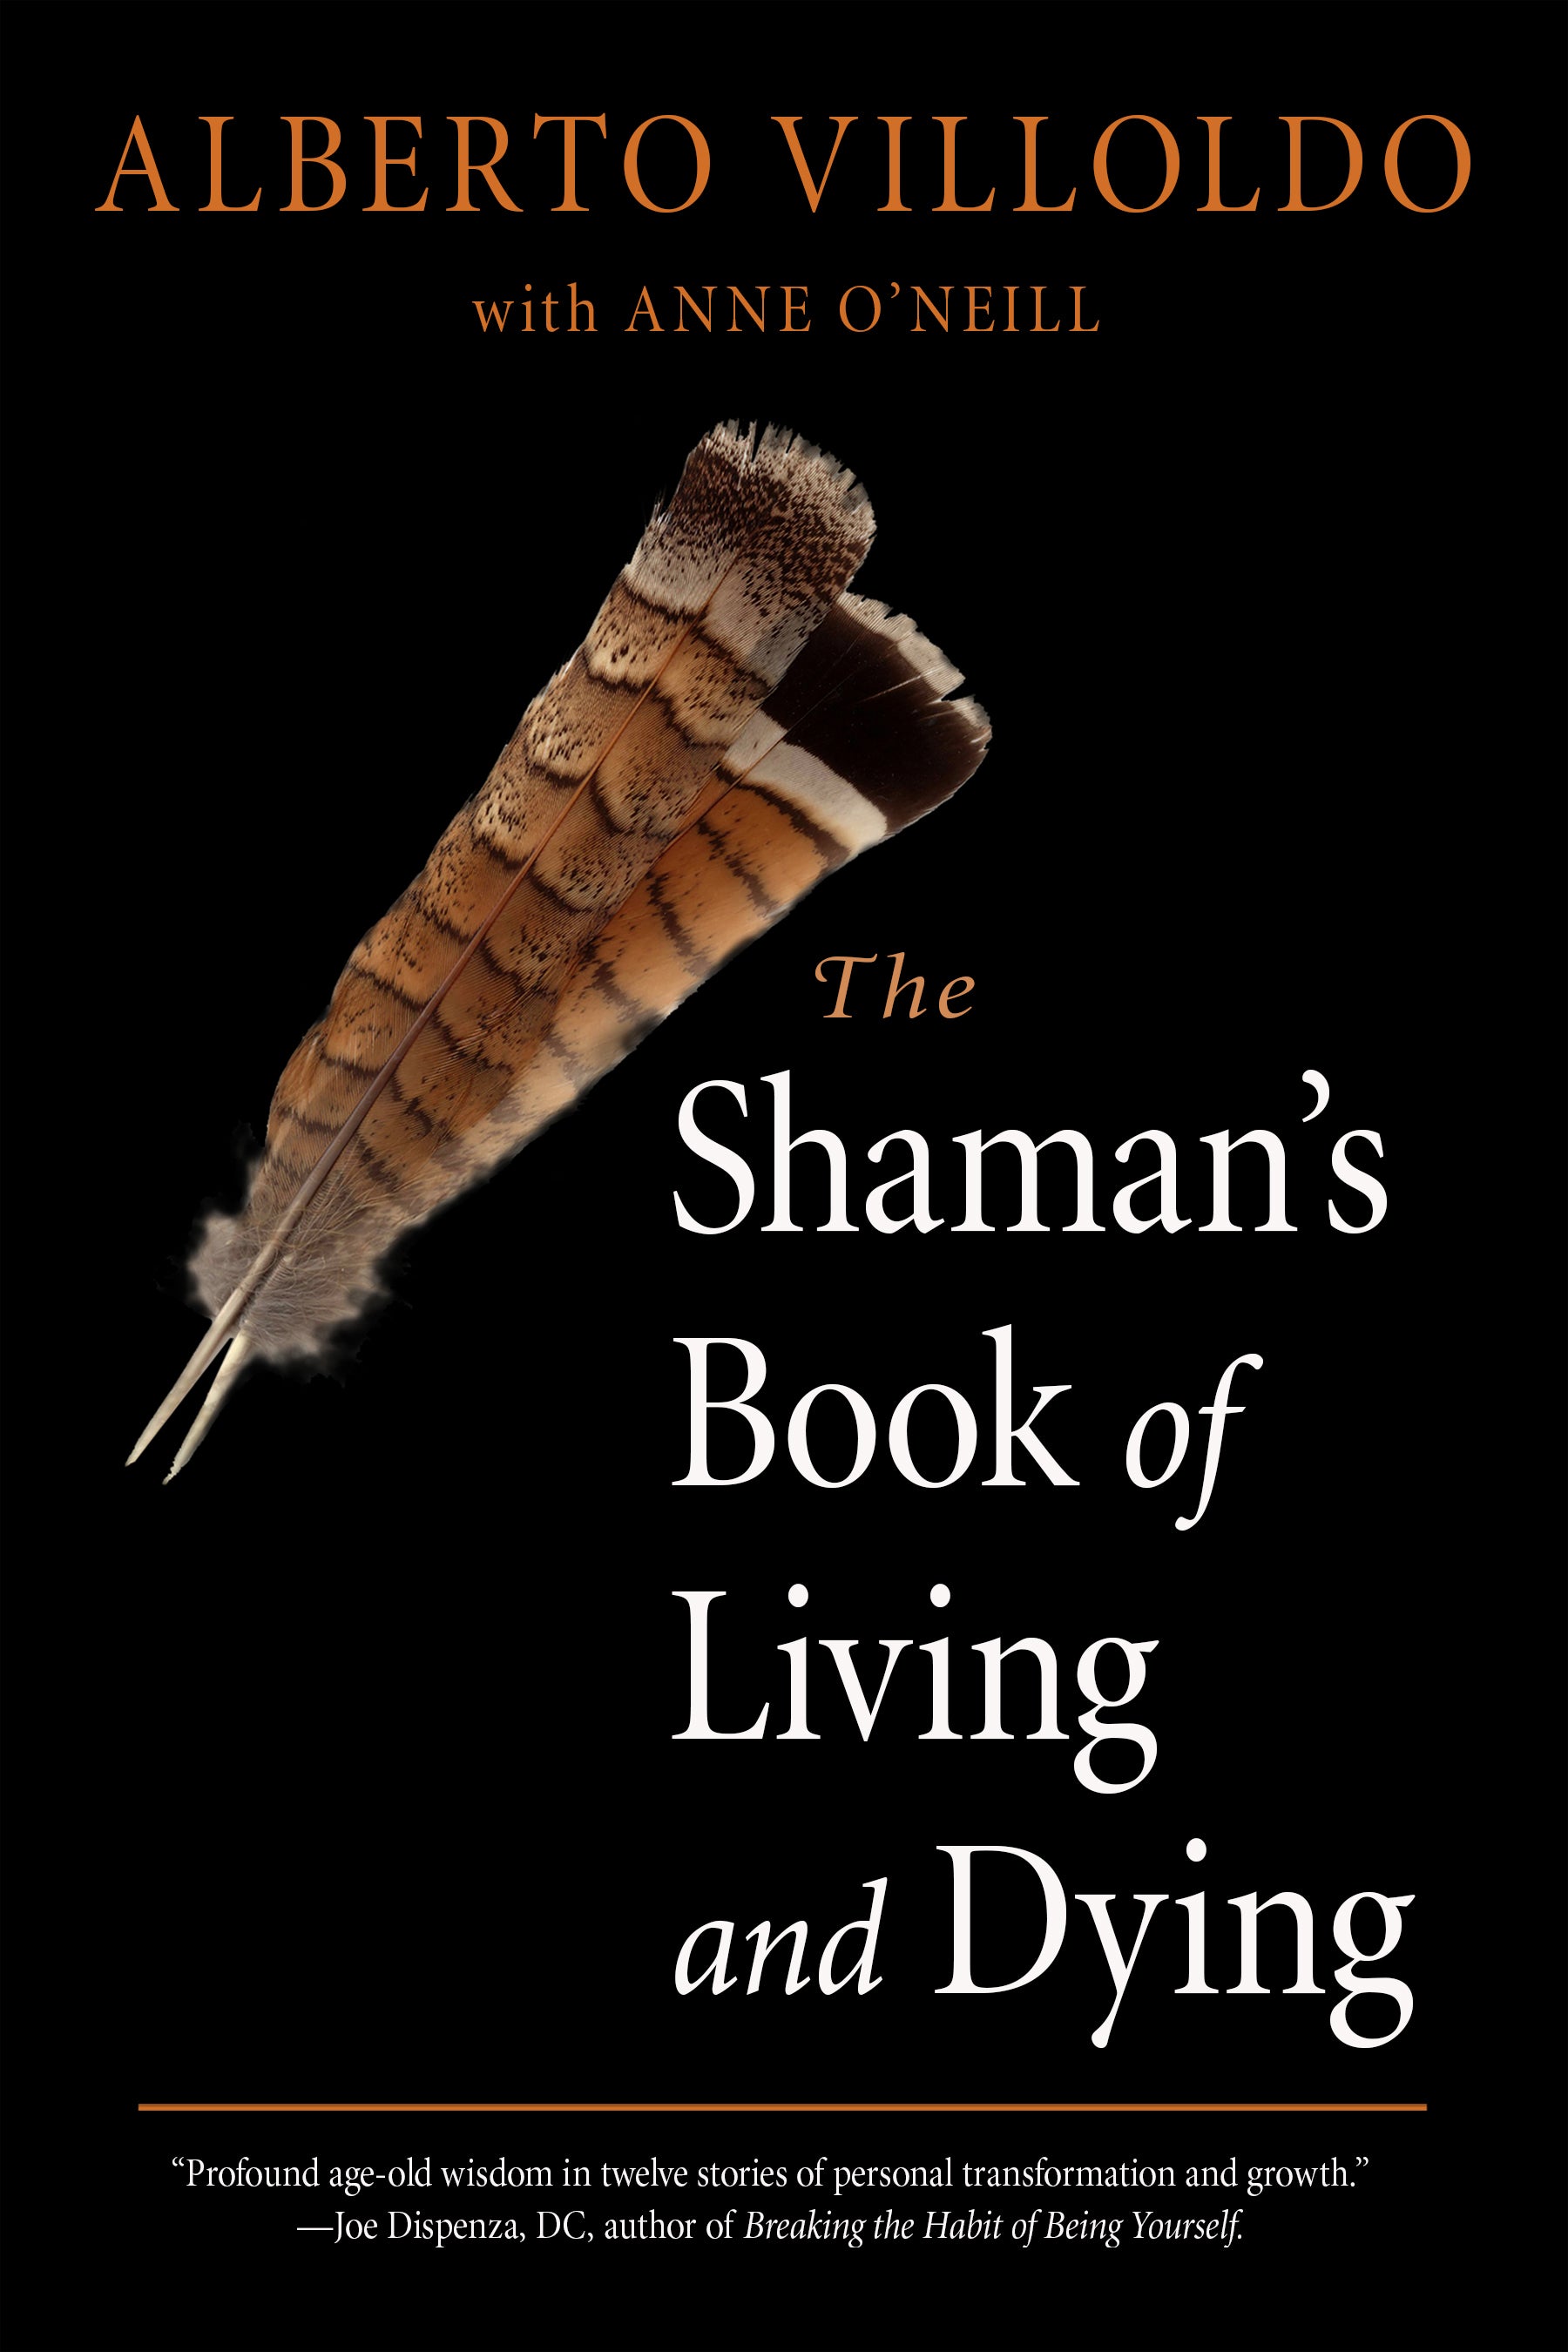 The Shaman's Book of Living and Dying;  Alberto Villoldo with Anne O'Neill